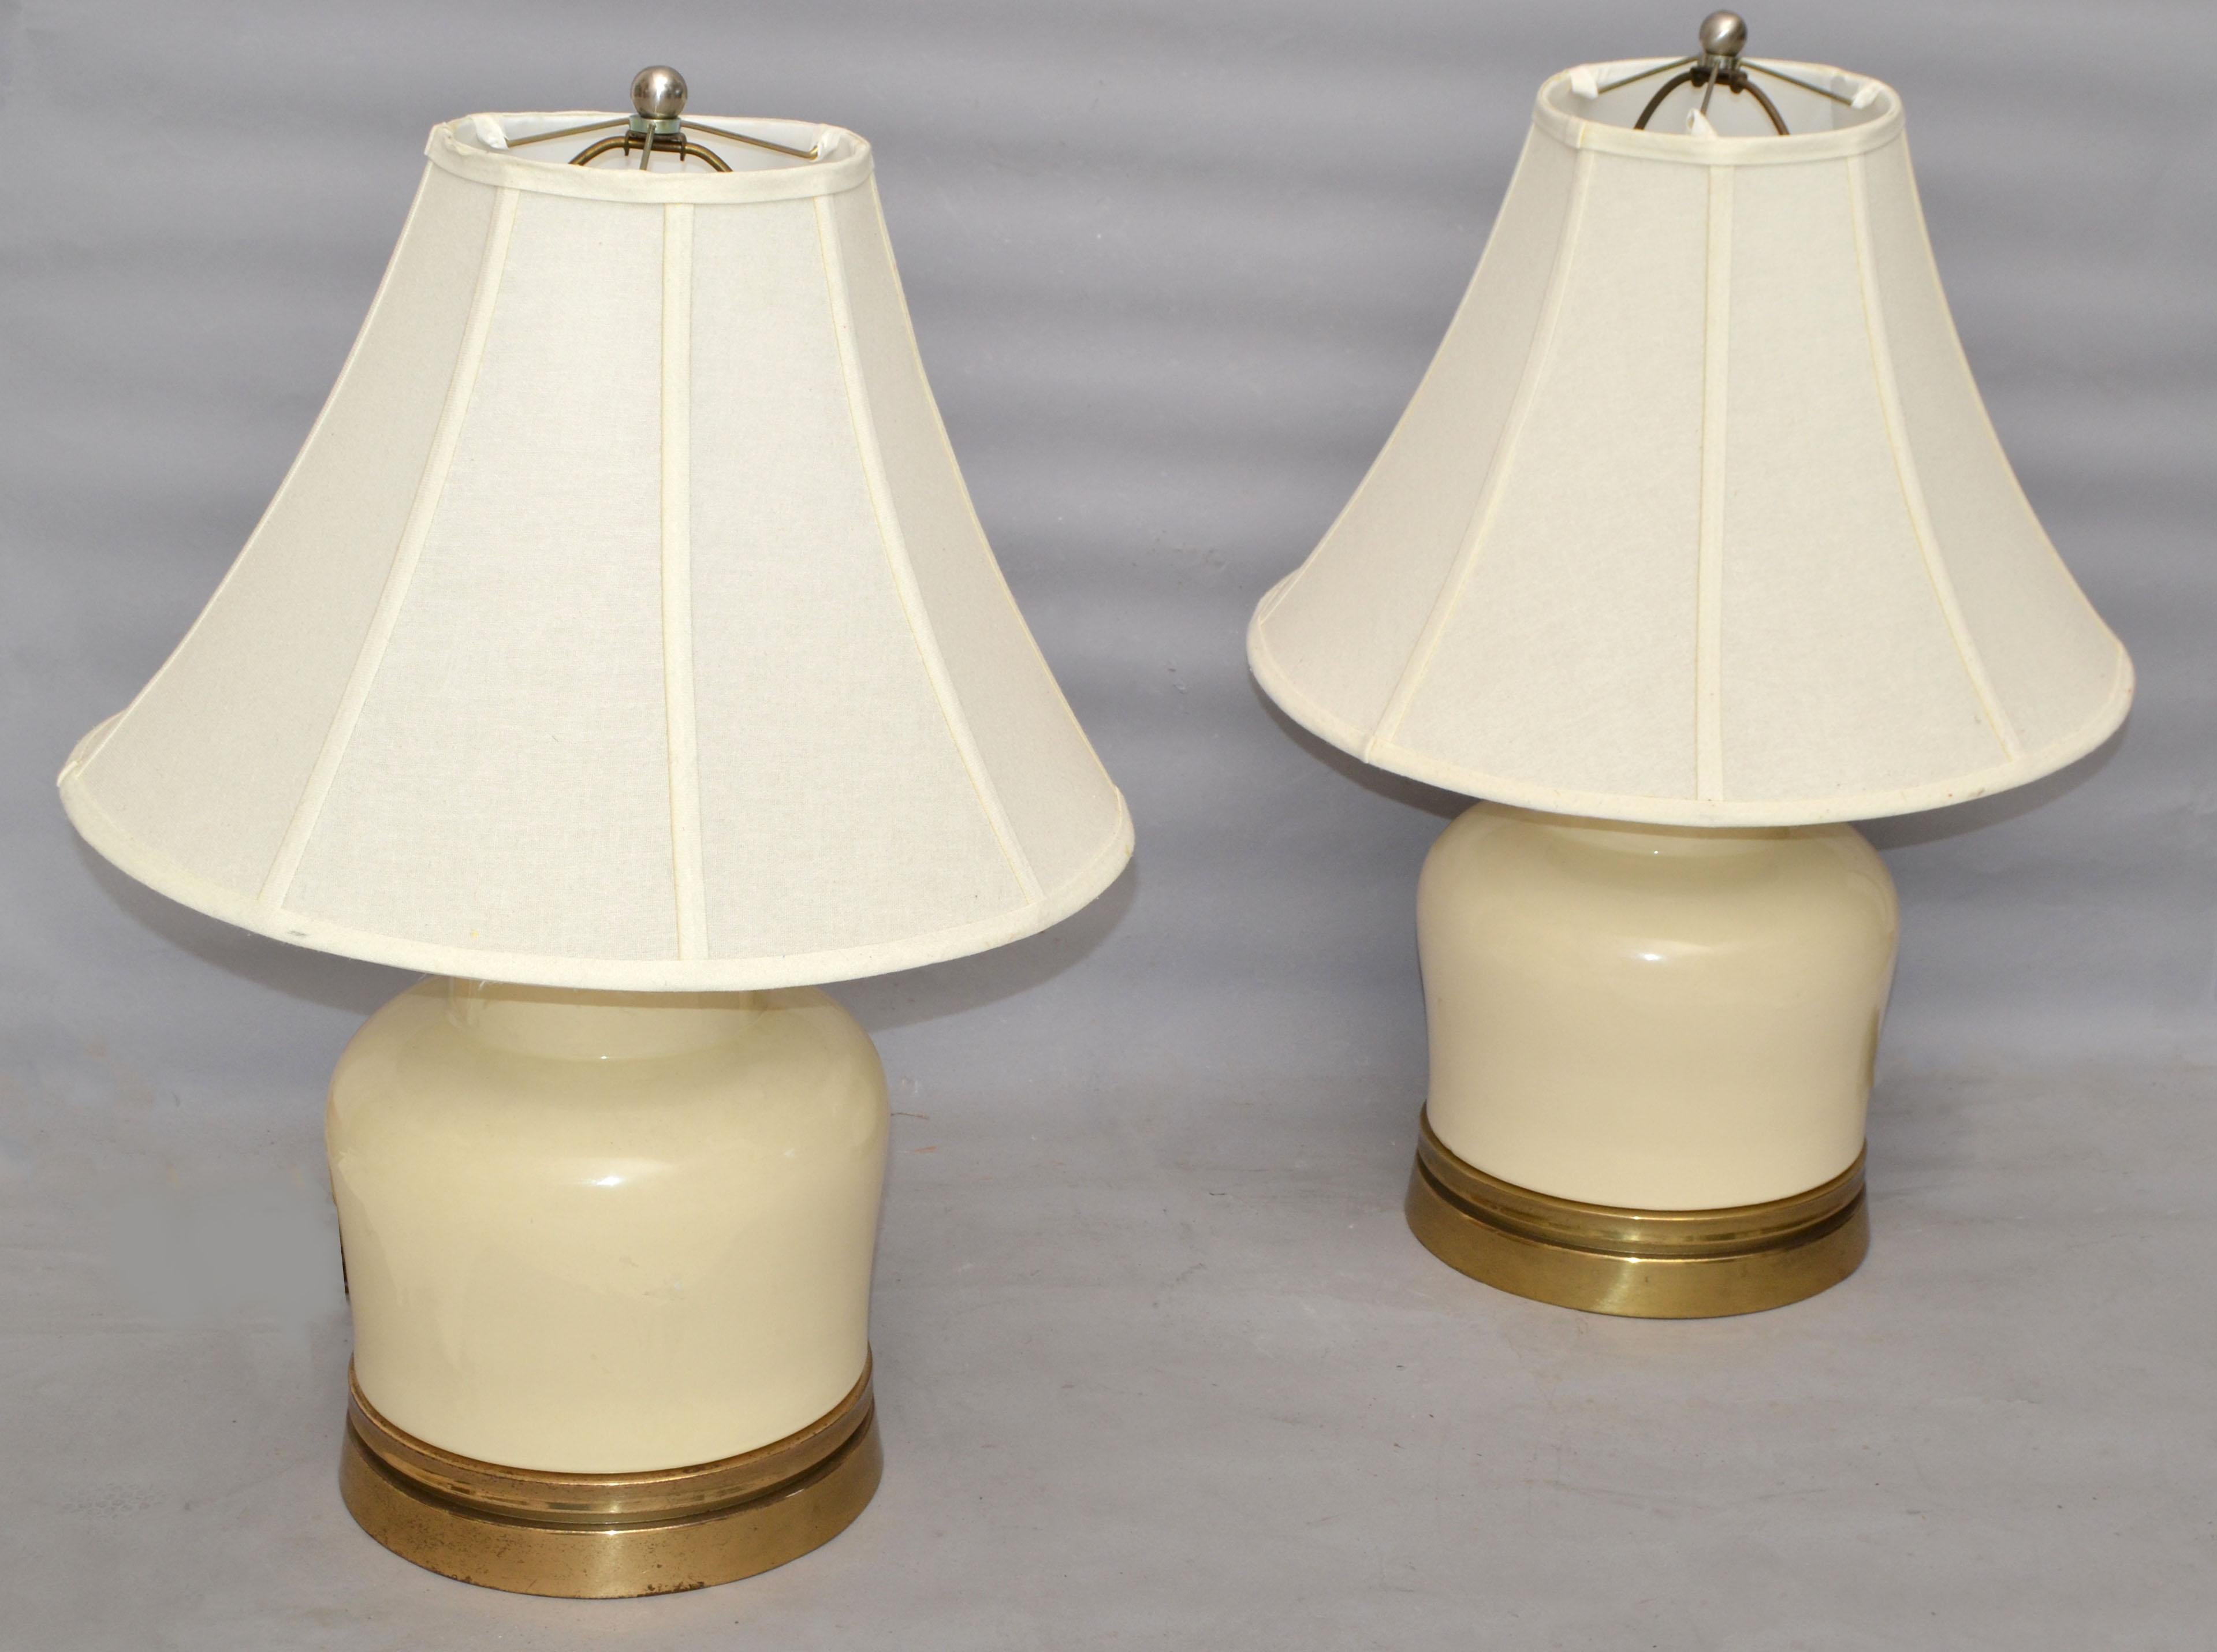 A pair of vintage Hollywood Regency Ginger Jar Ceramic & Bronze Table Lamps in the Style of Chapman.
Perfect working condition, UL Listed and each uses a regular or LED light bulb.
The set comes with harp, finial and original shades, which are